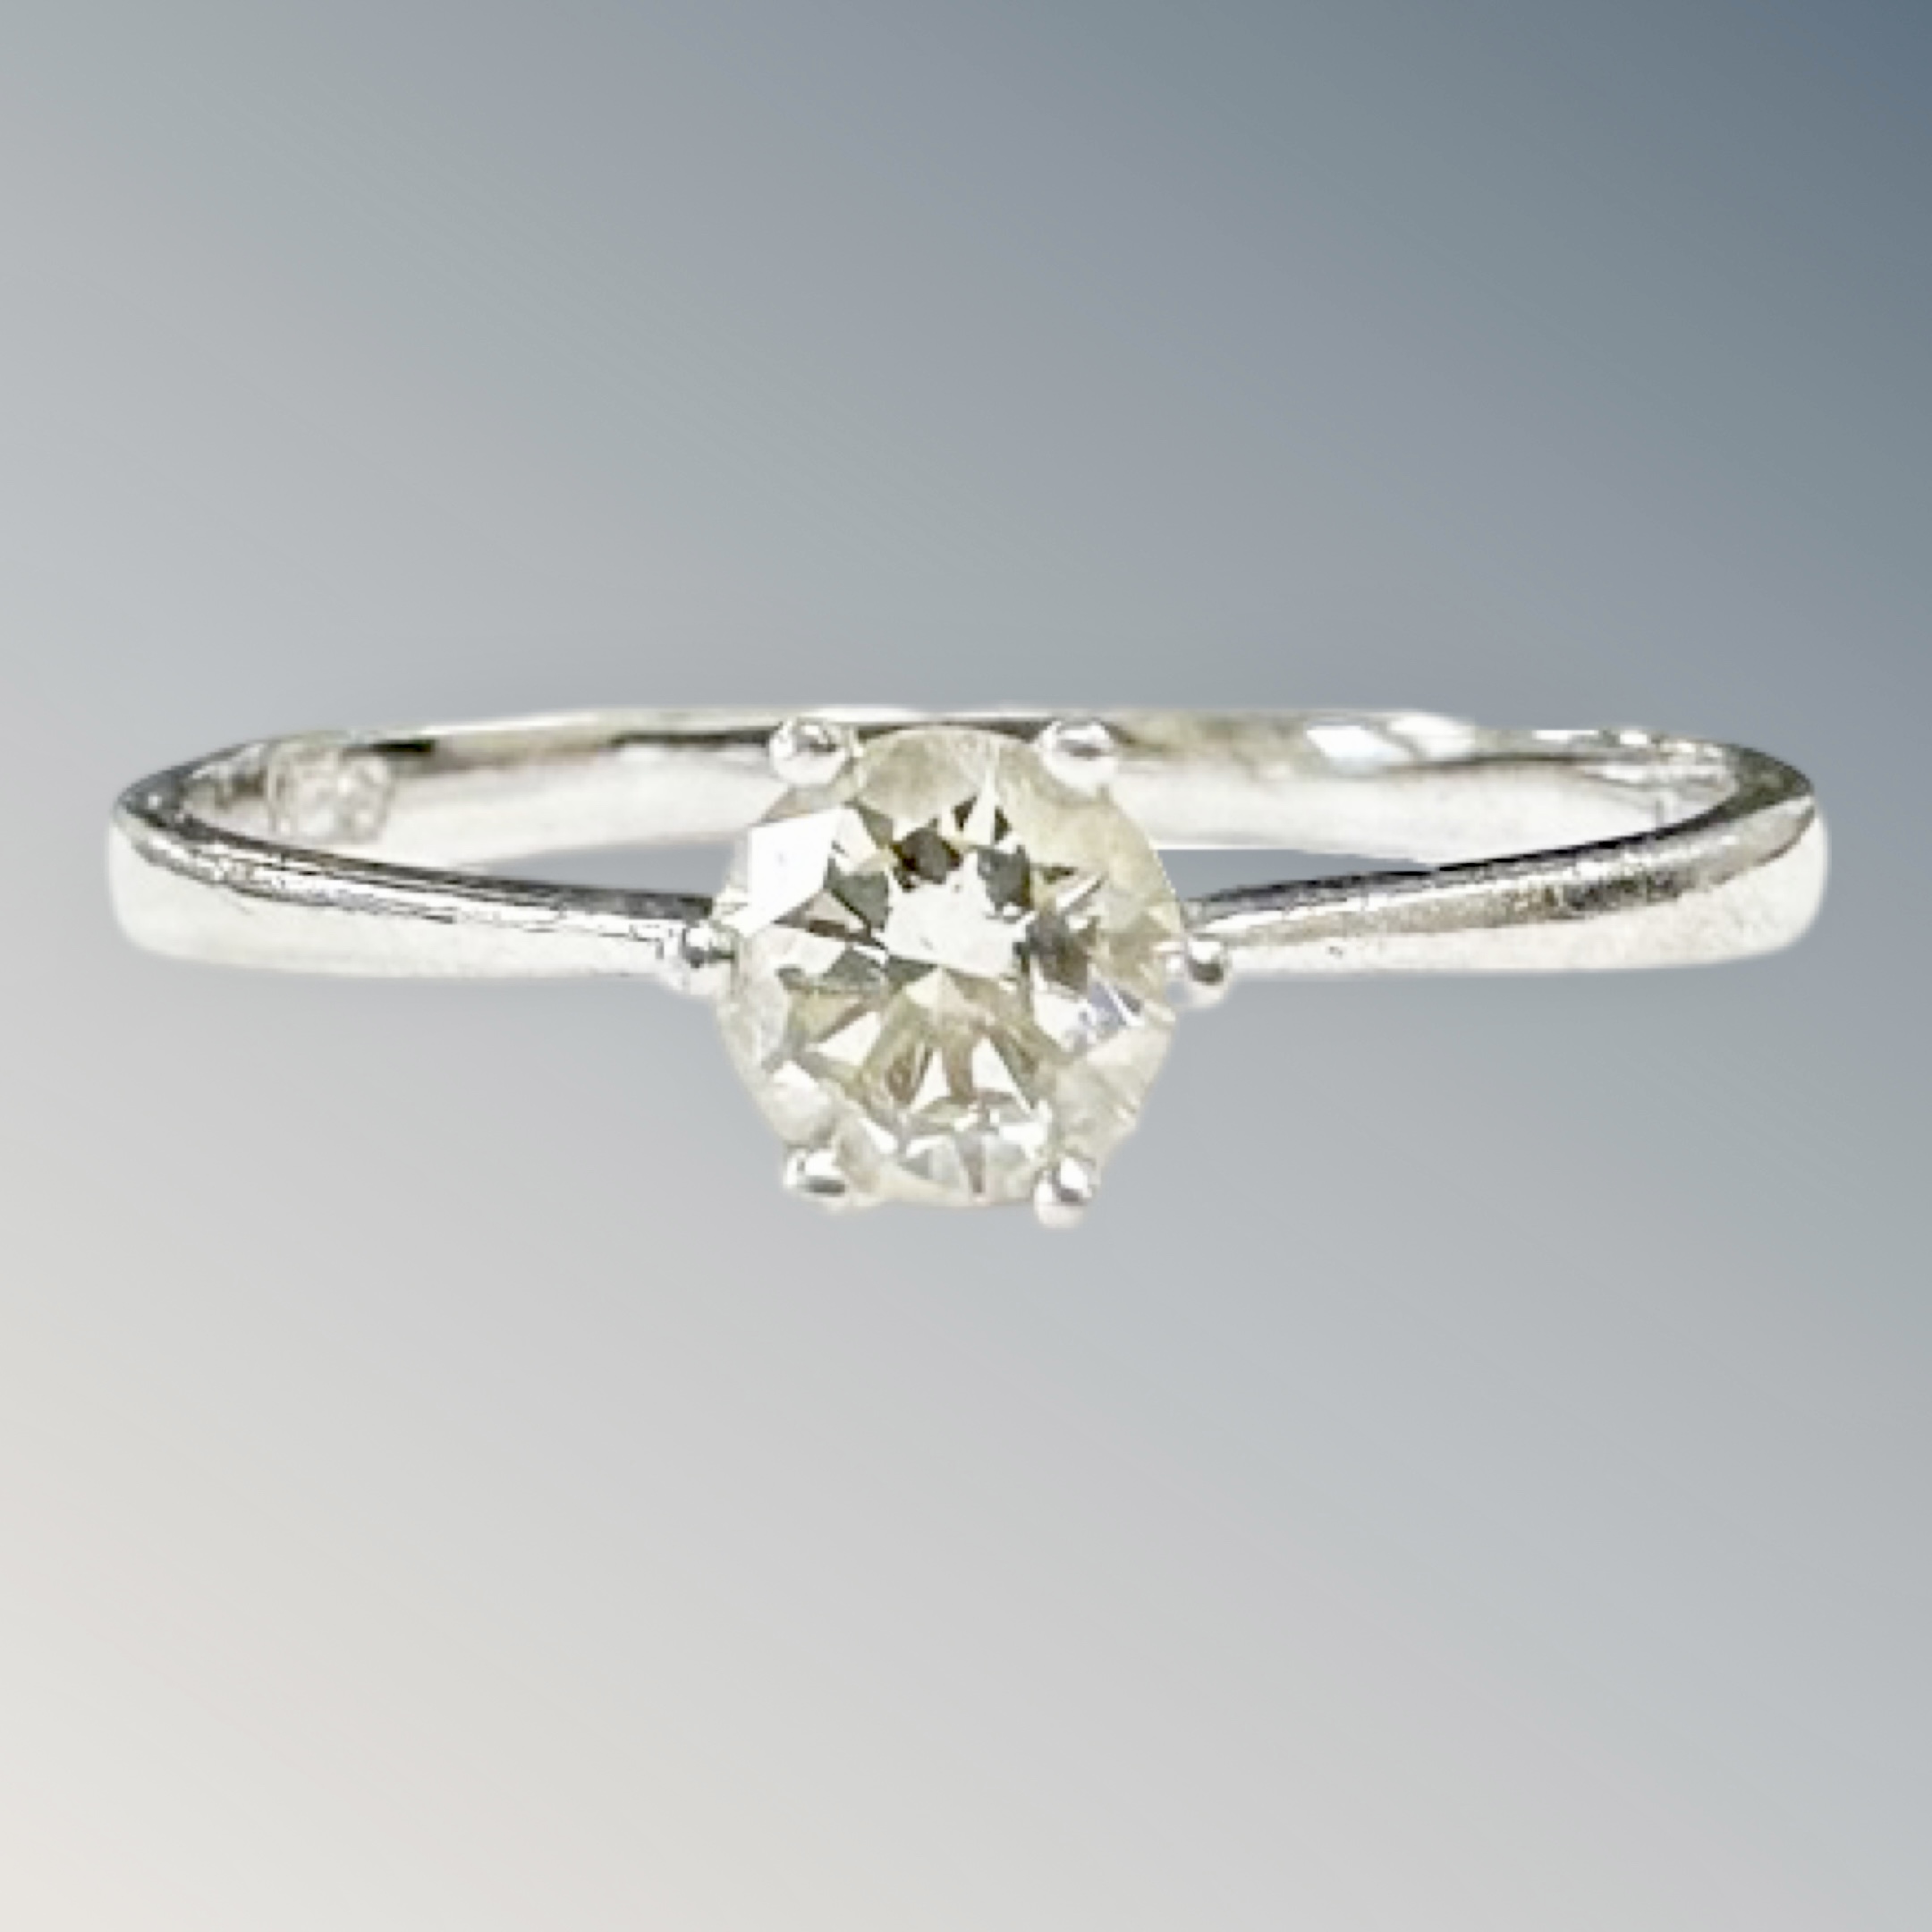 A platinum diamond solitaire ring, the stated diamond weight 0.